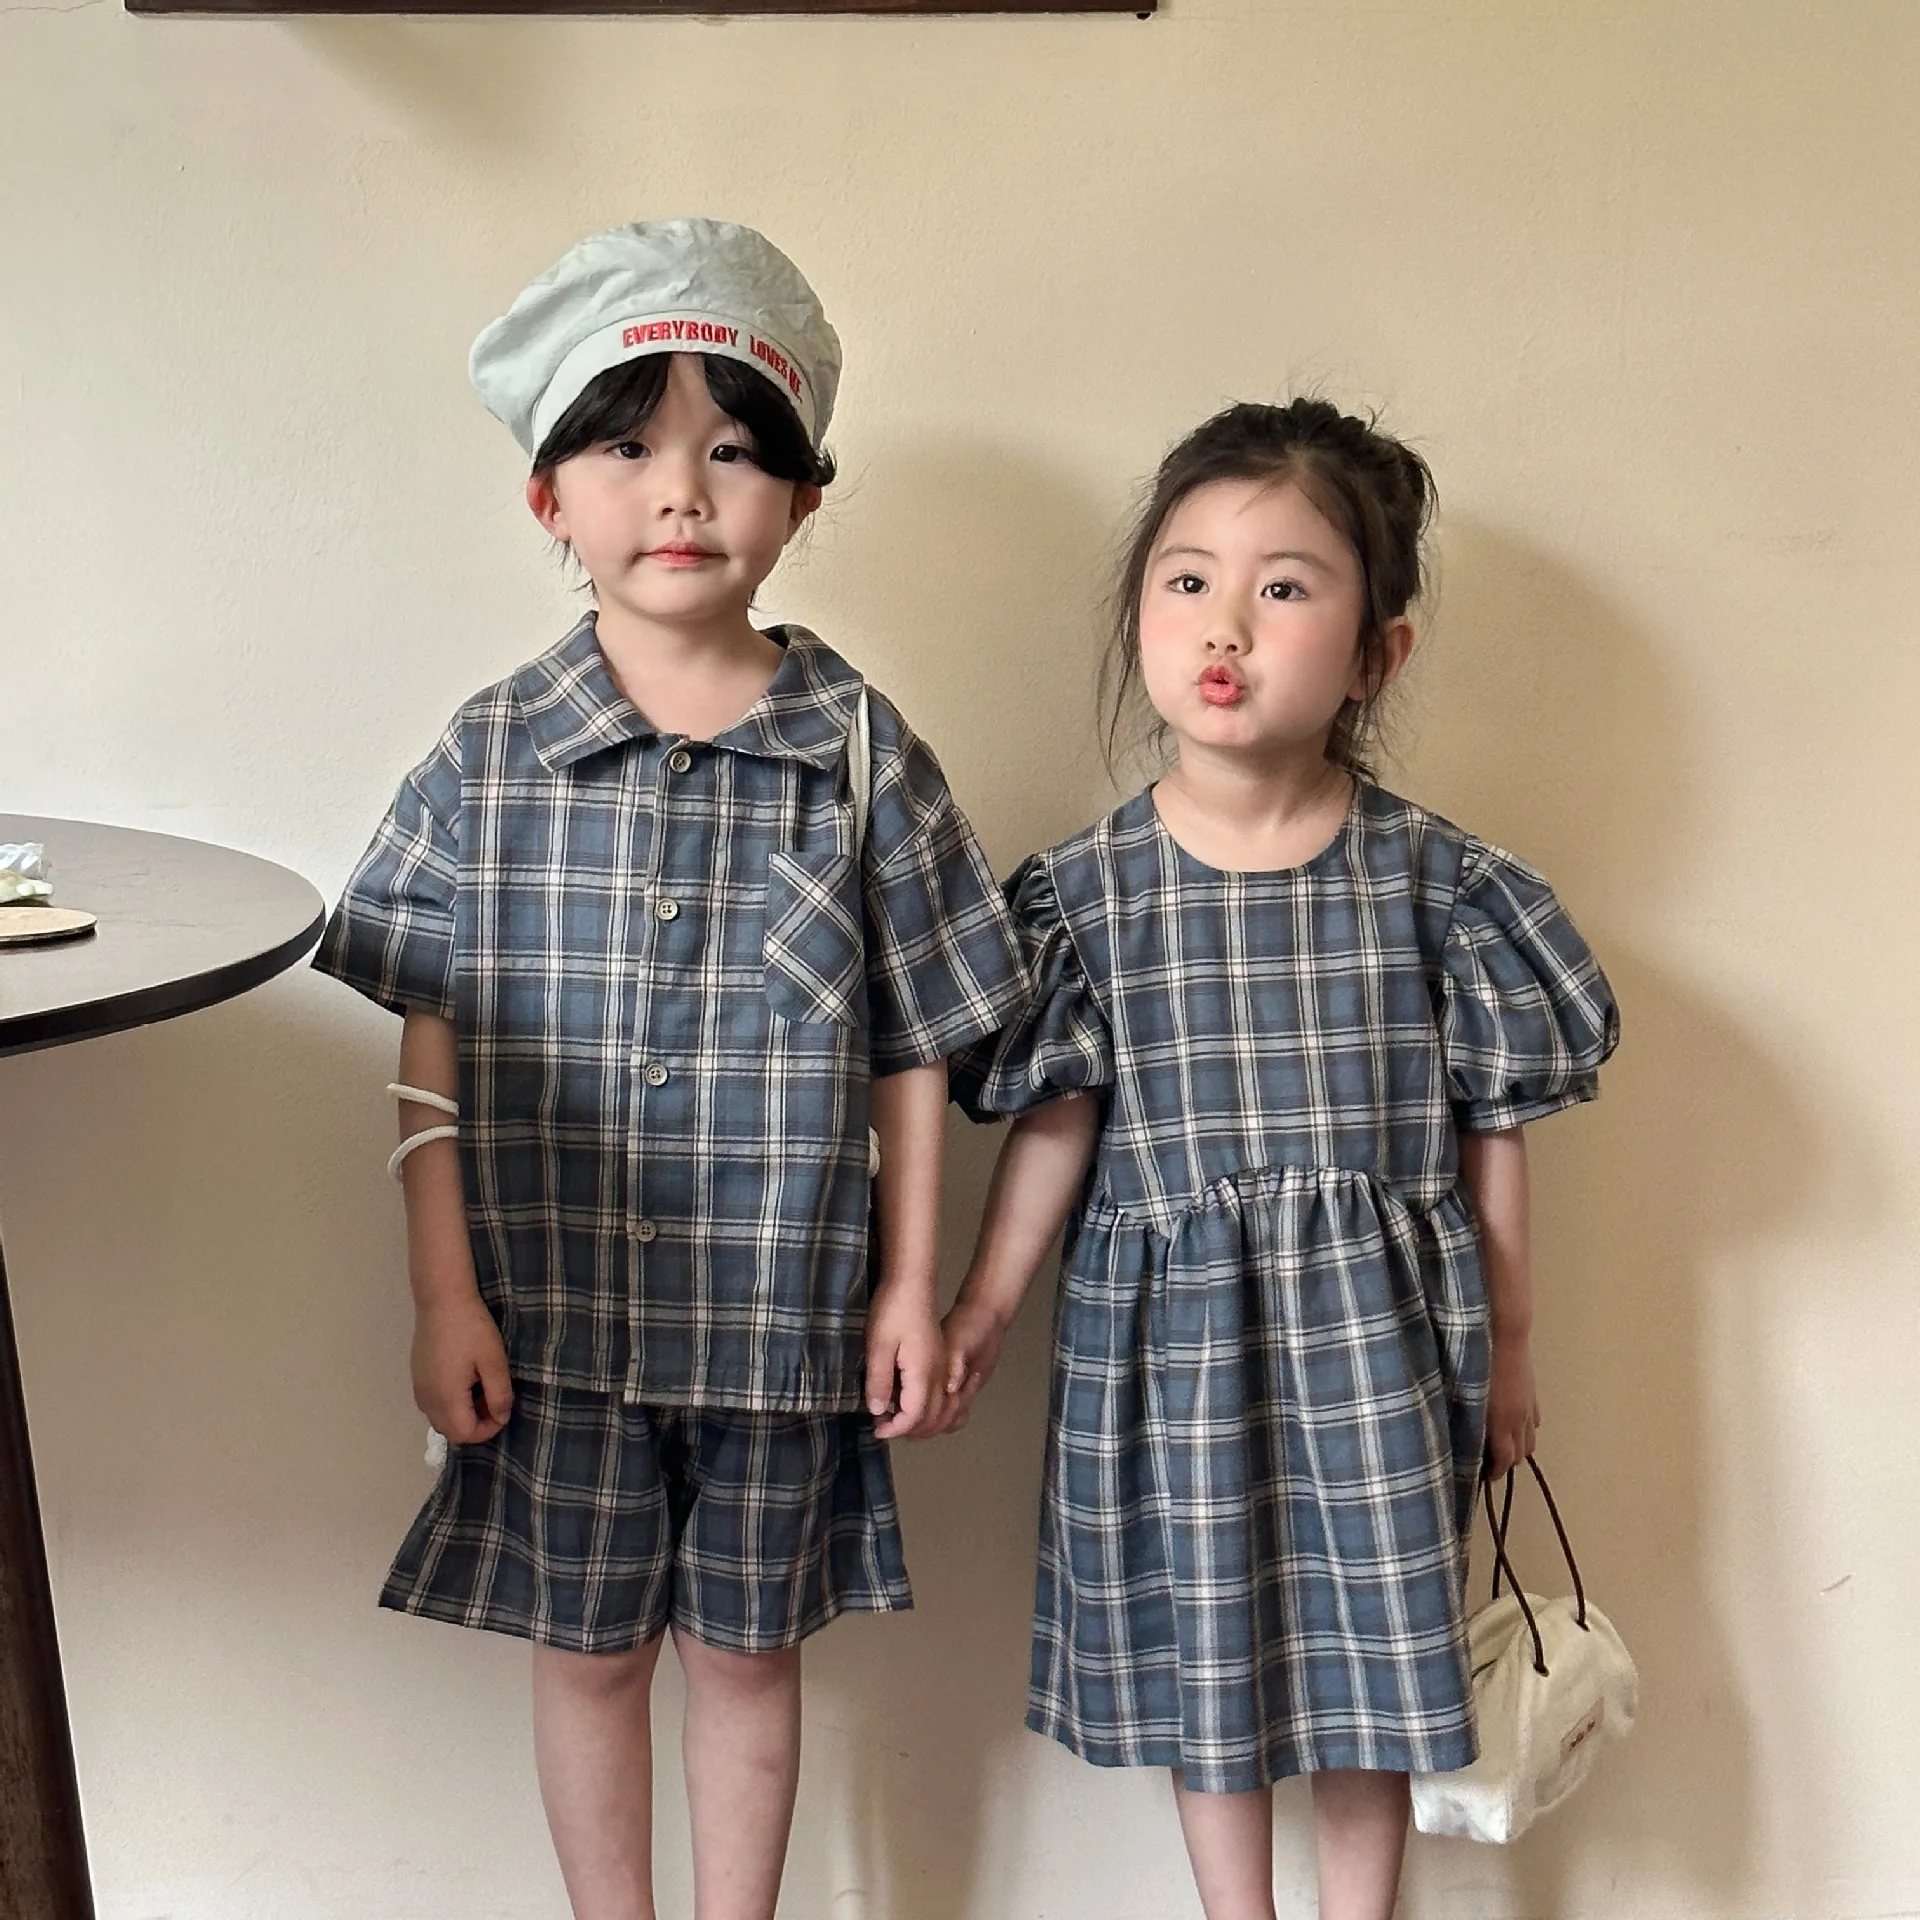 

Children Summer Plaid Clothes Set Brother Sister Outfits Boys Kids Short Sleeve Plaid Shirt and Shorts 2pcs Baby Girls Dress